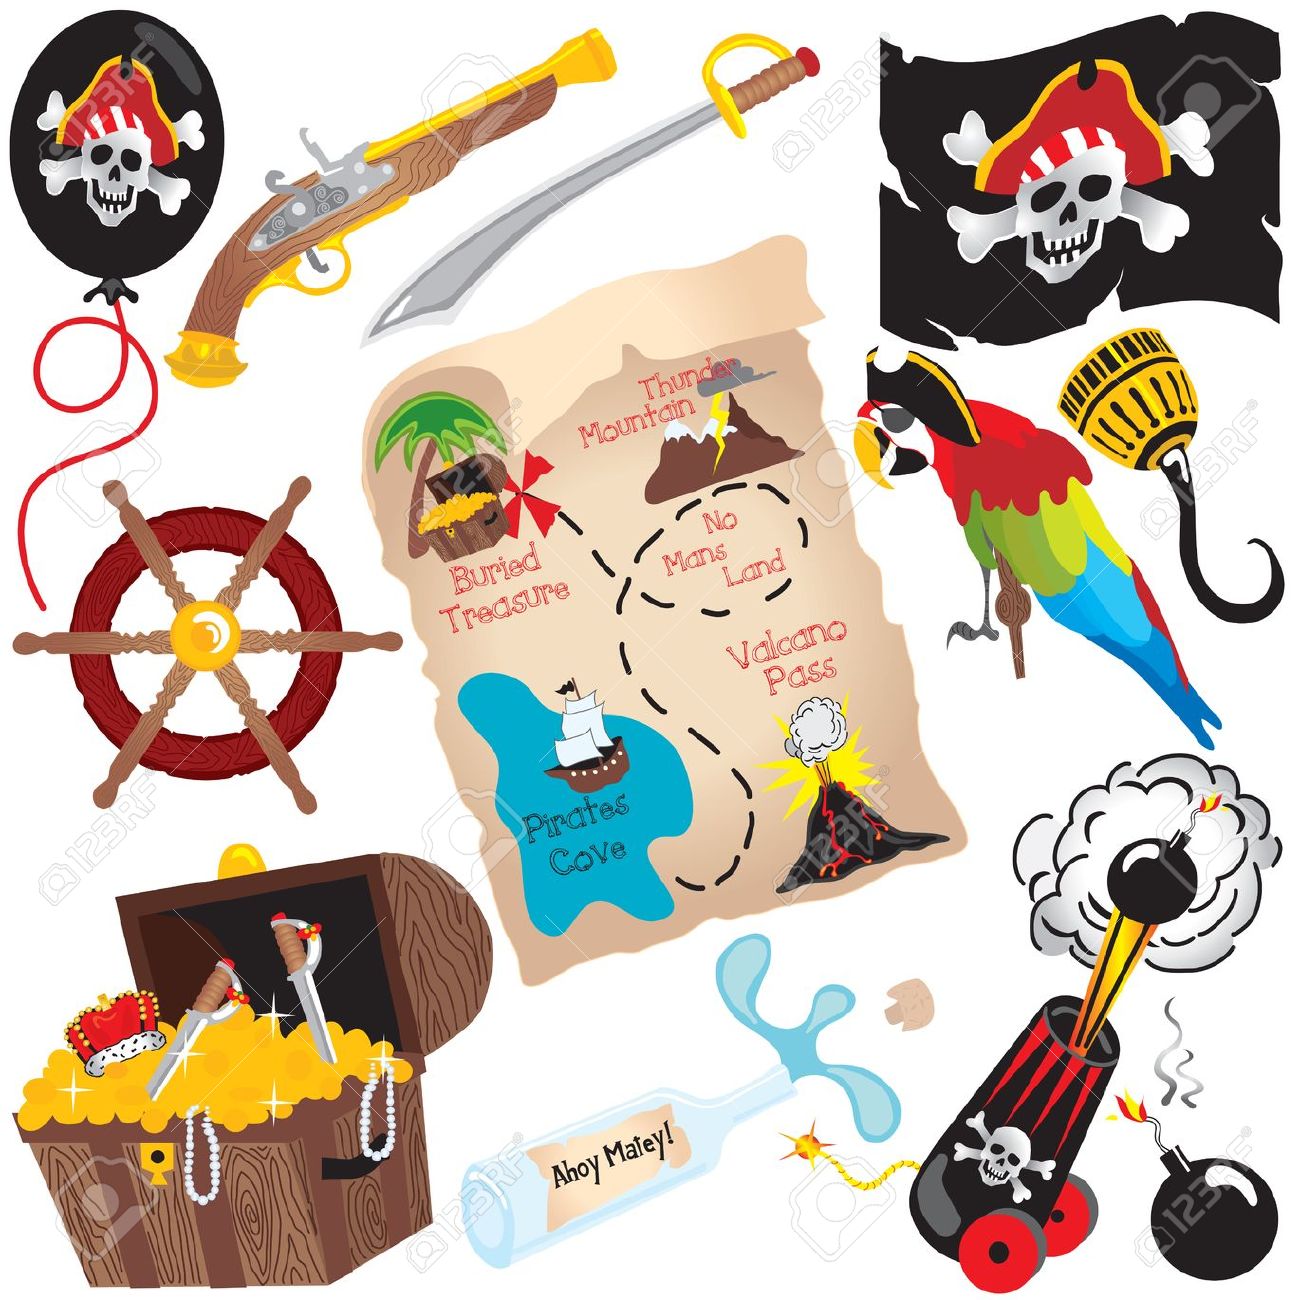 Treasure map in a bottle clipart